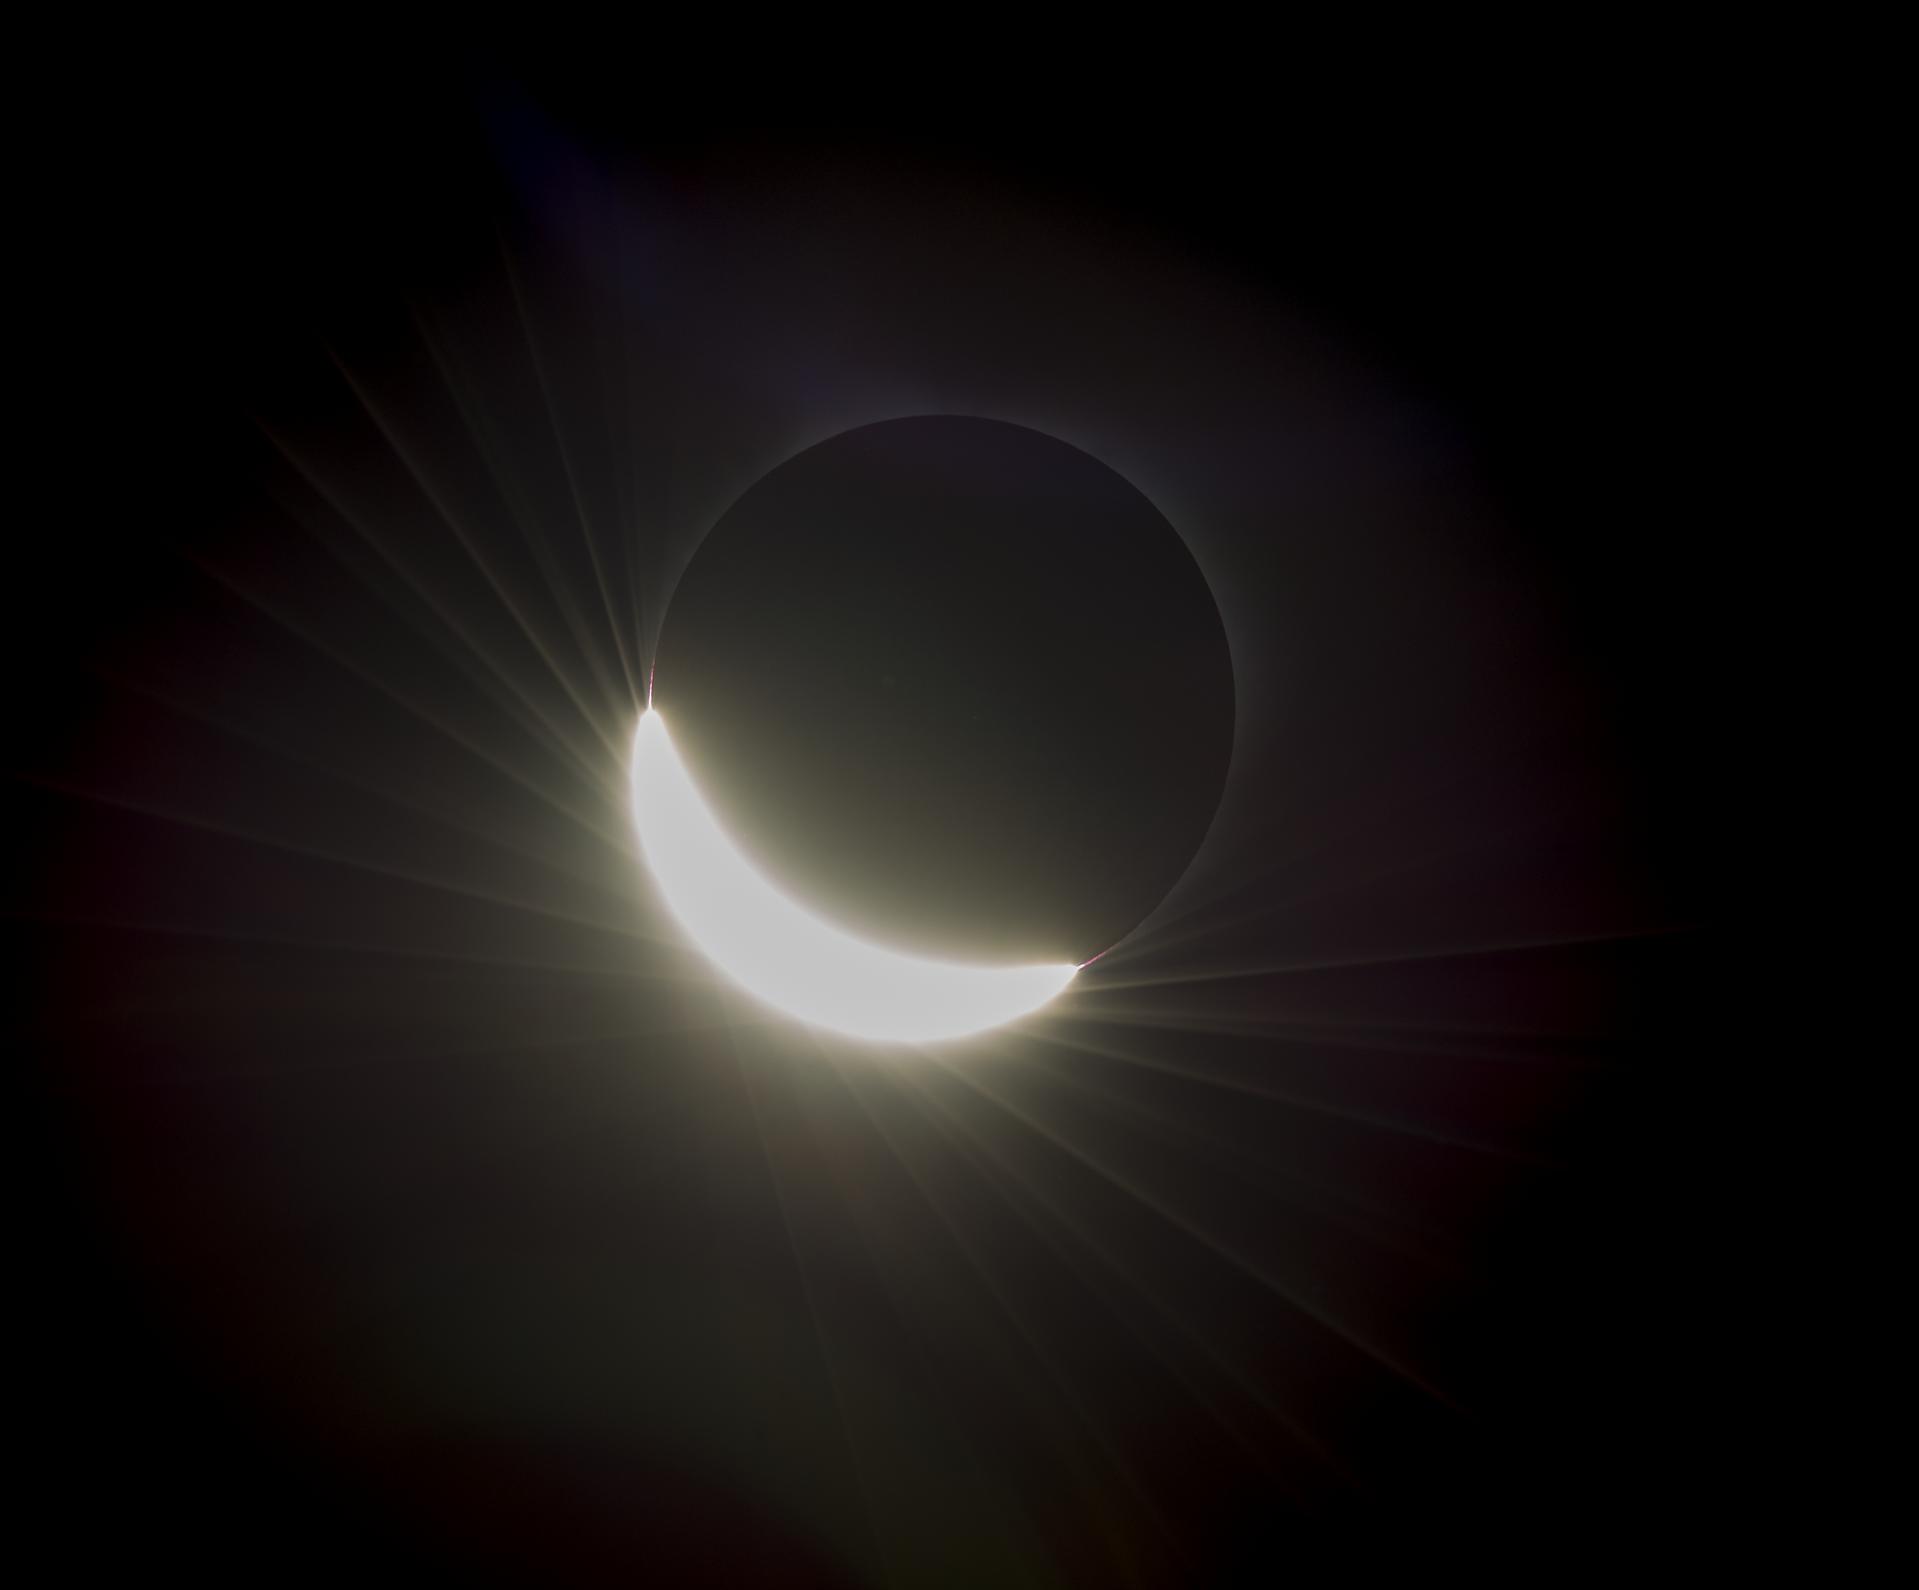 Total solar eclipse to occur over parts of CNY two years from now